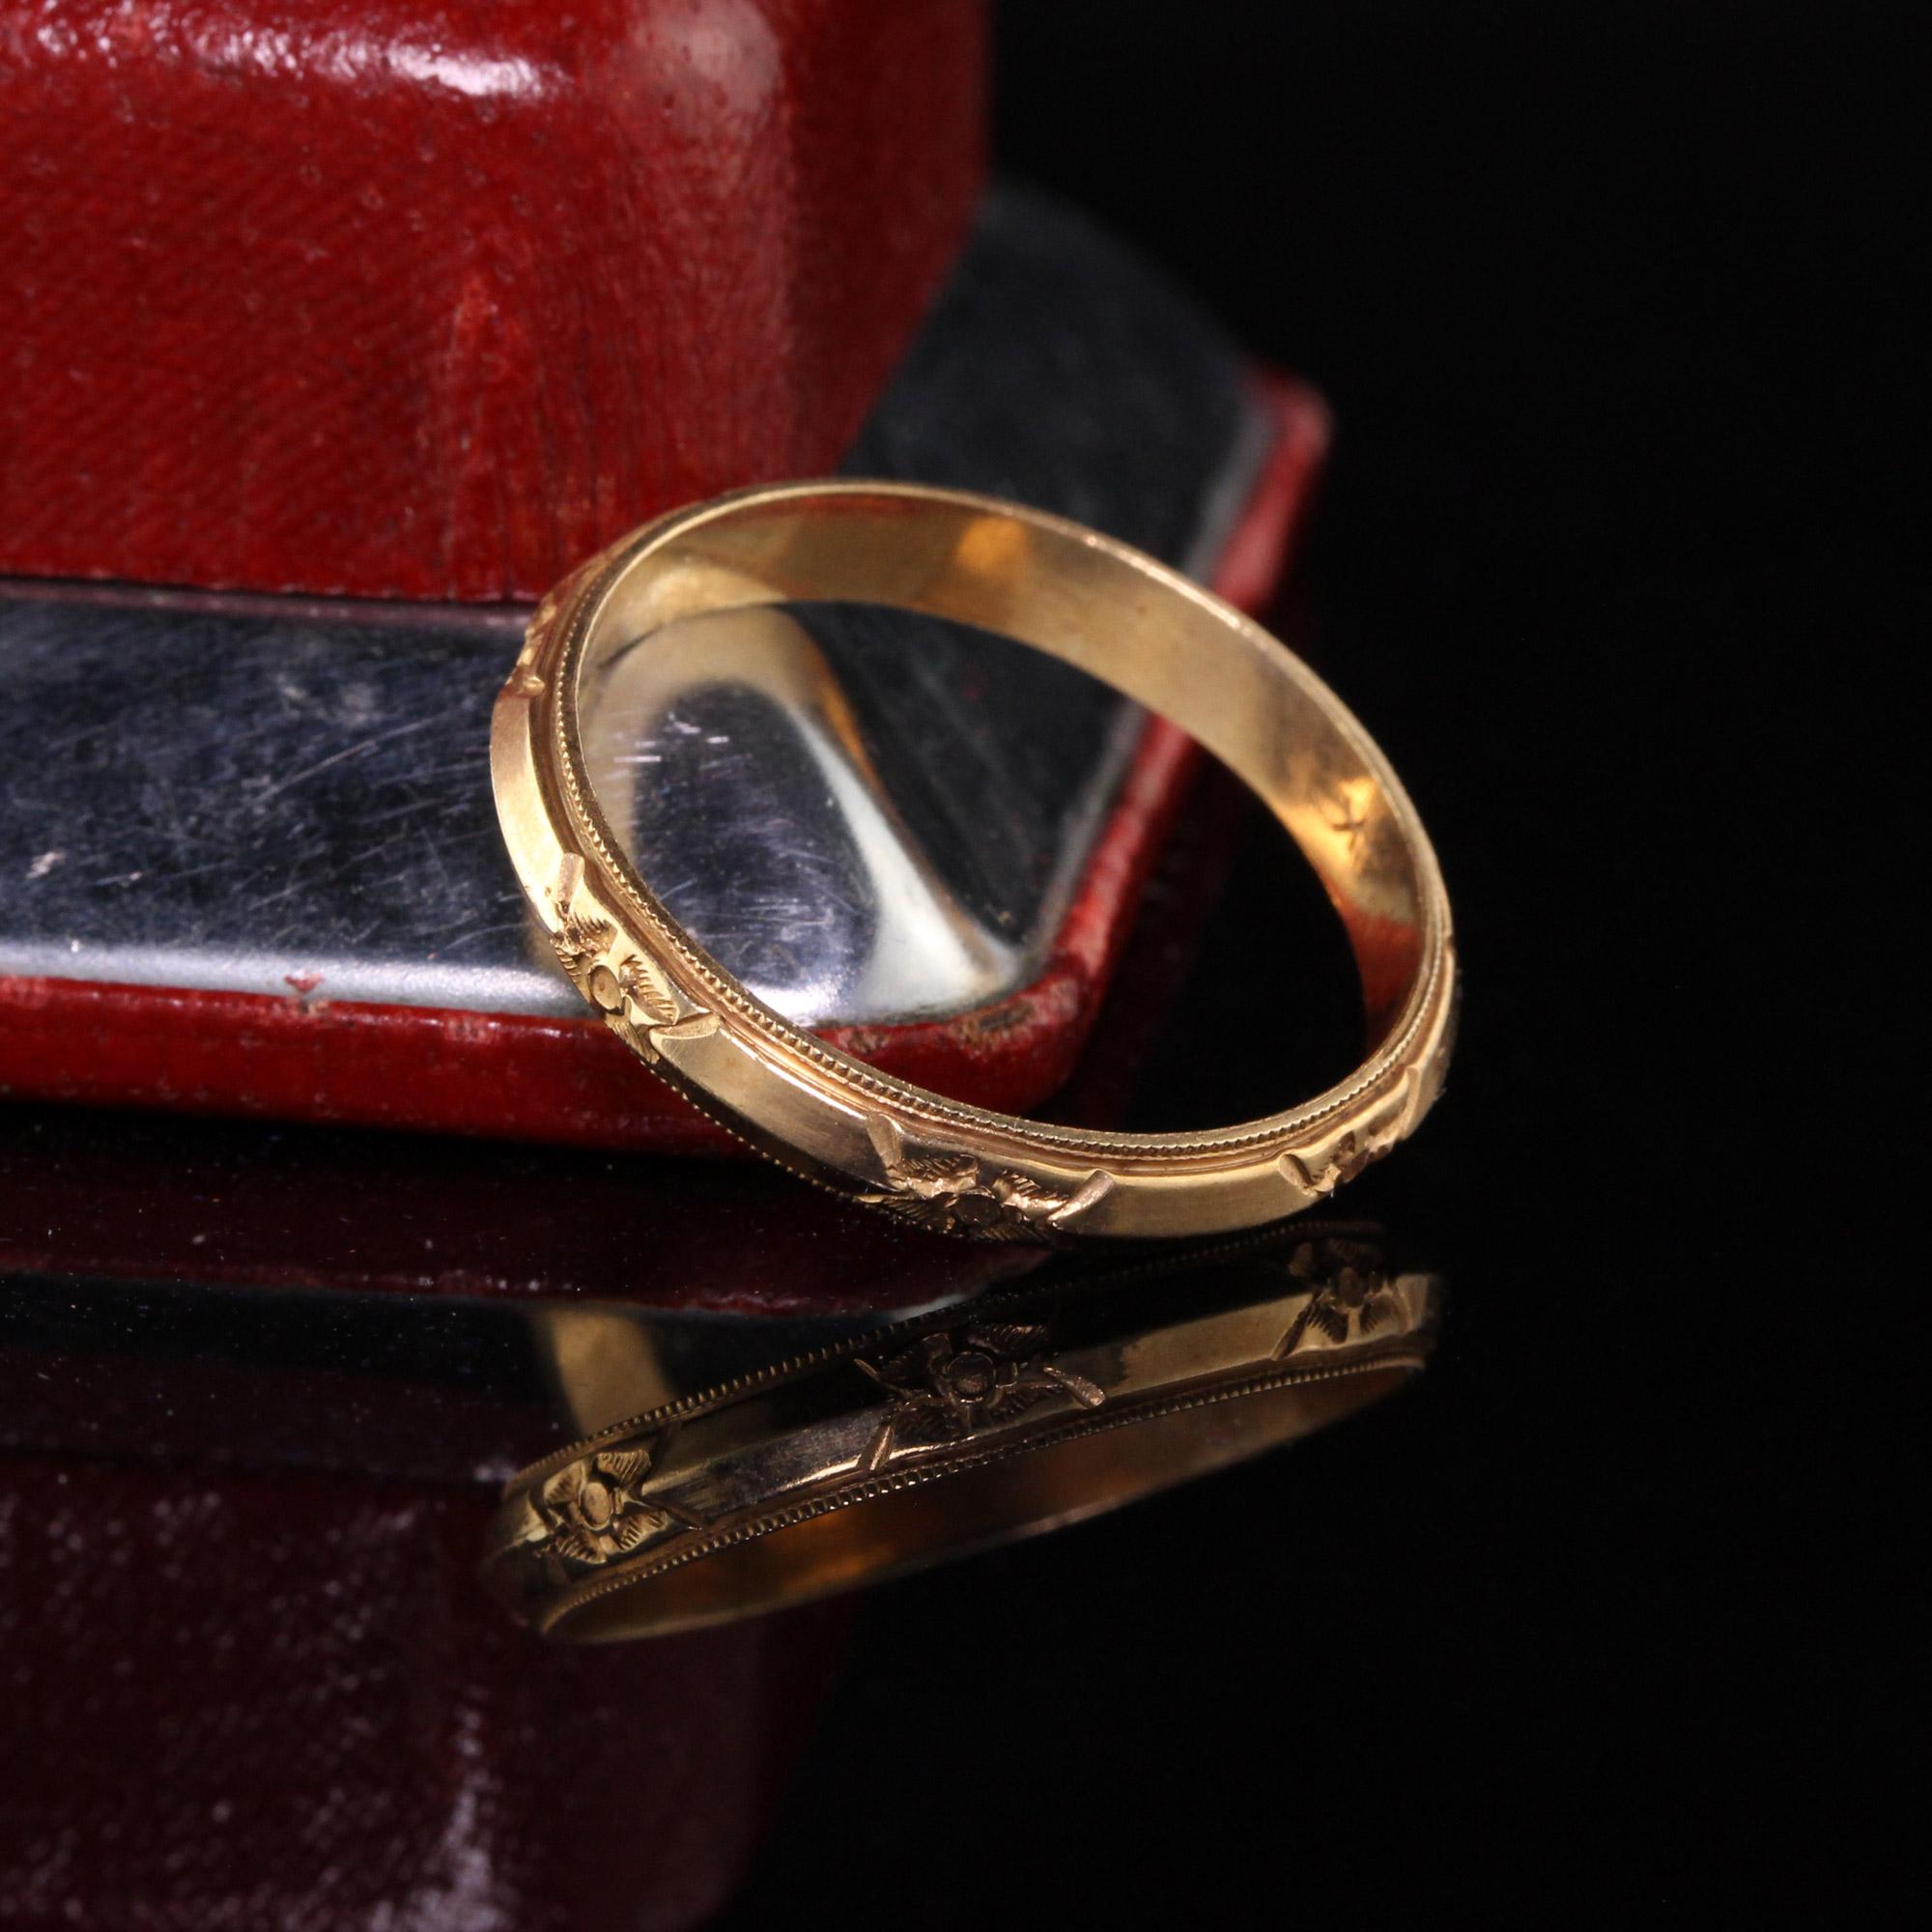 Gorgeous Antique Art Deco 14K Yellow Gold Engraved Wedding Band - Size 9 1/2. This gorgeous pristine wedding band is a new old stock ring that has never been worn before. It has survived 100+ years in a safe and just recently discovered. It is truly